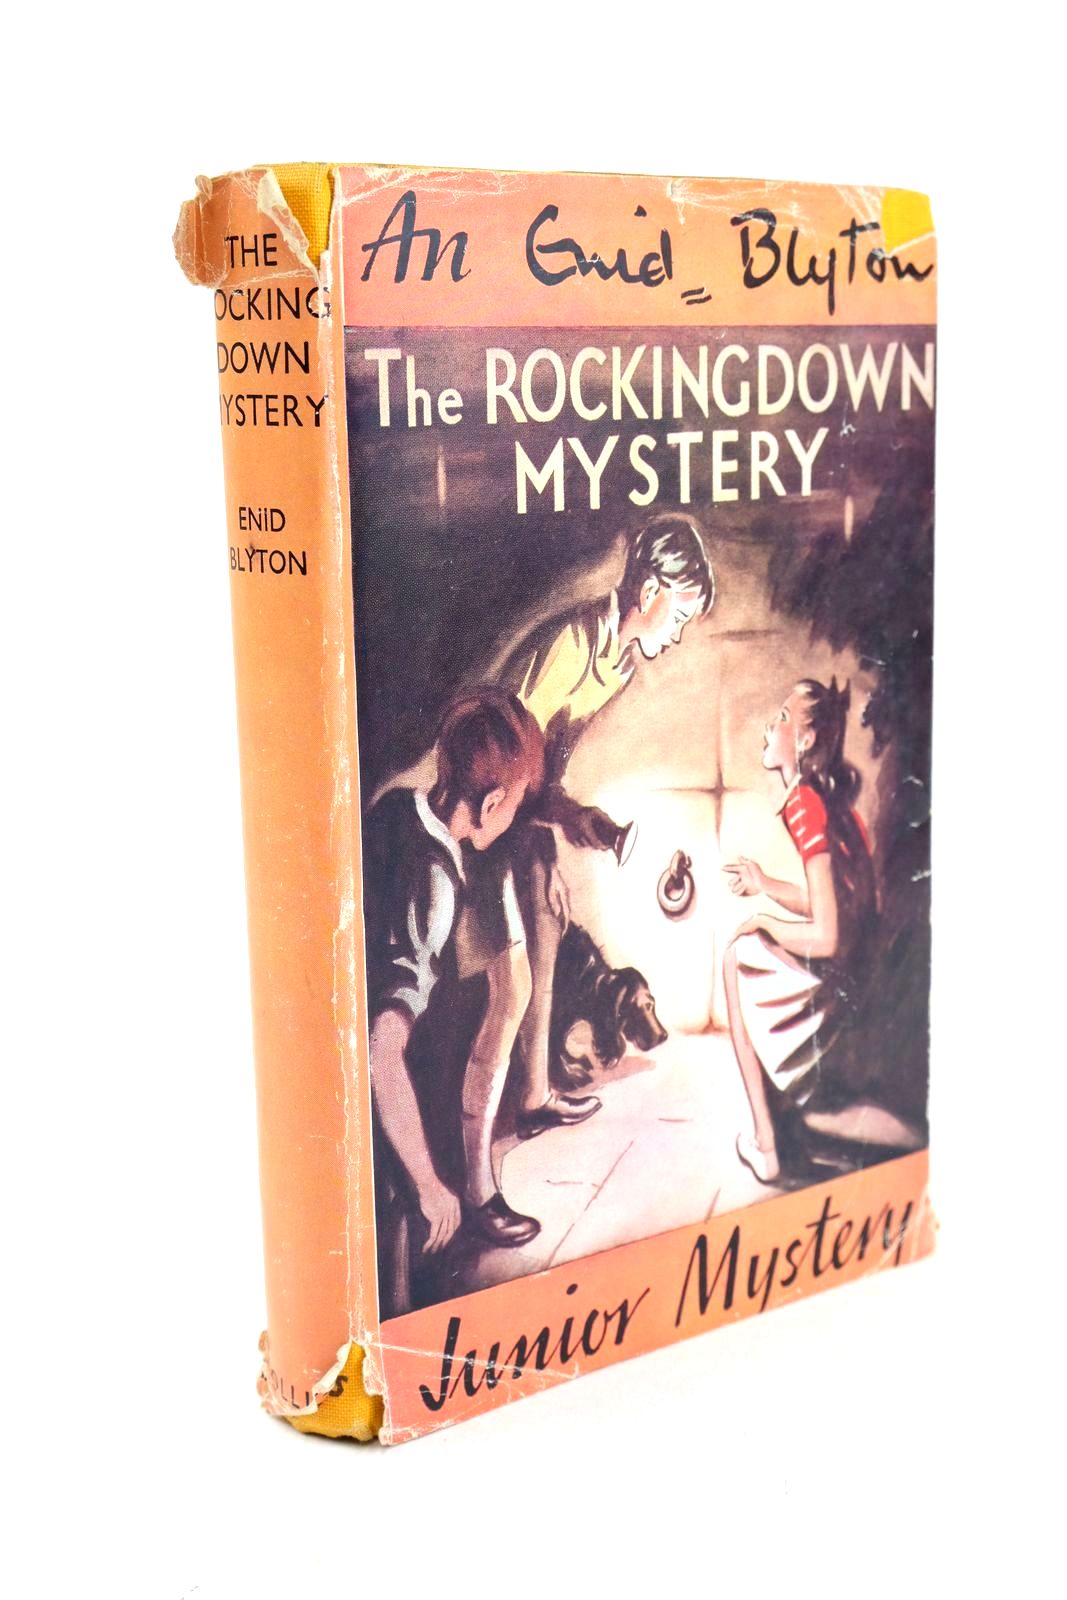 Photo of THE ROCKINGDOWN MYSTERY written by Blyton, Enid illustrated by Dunlop, Gilbert published by Collins (STOCK CODE: 1326753)  for sale by Stella & Rose's Books